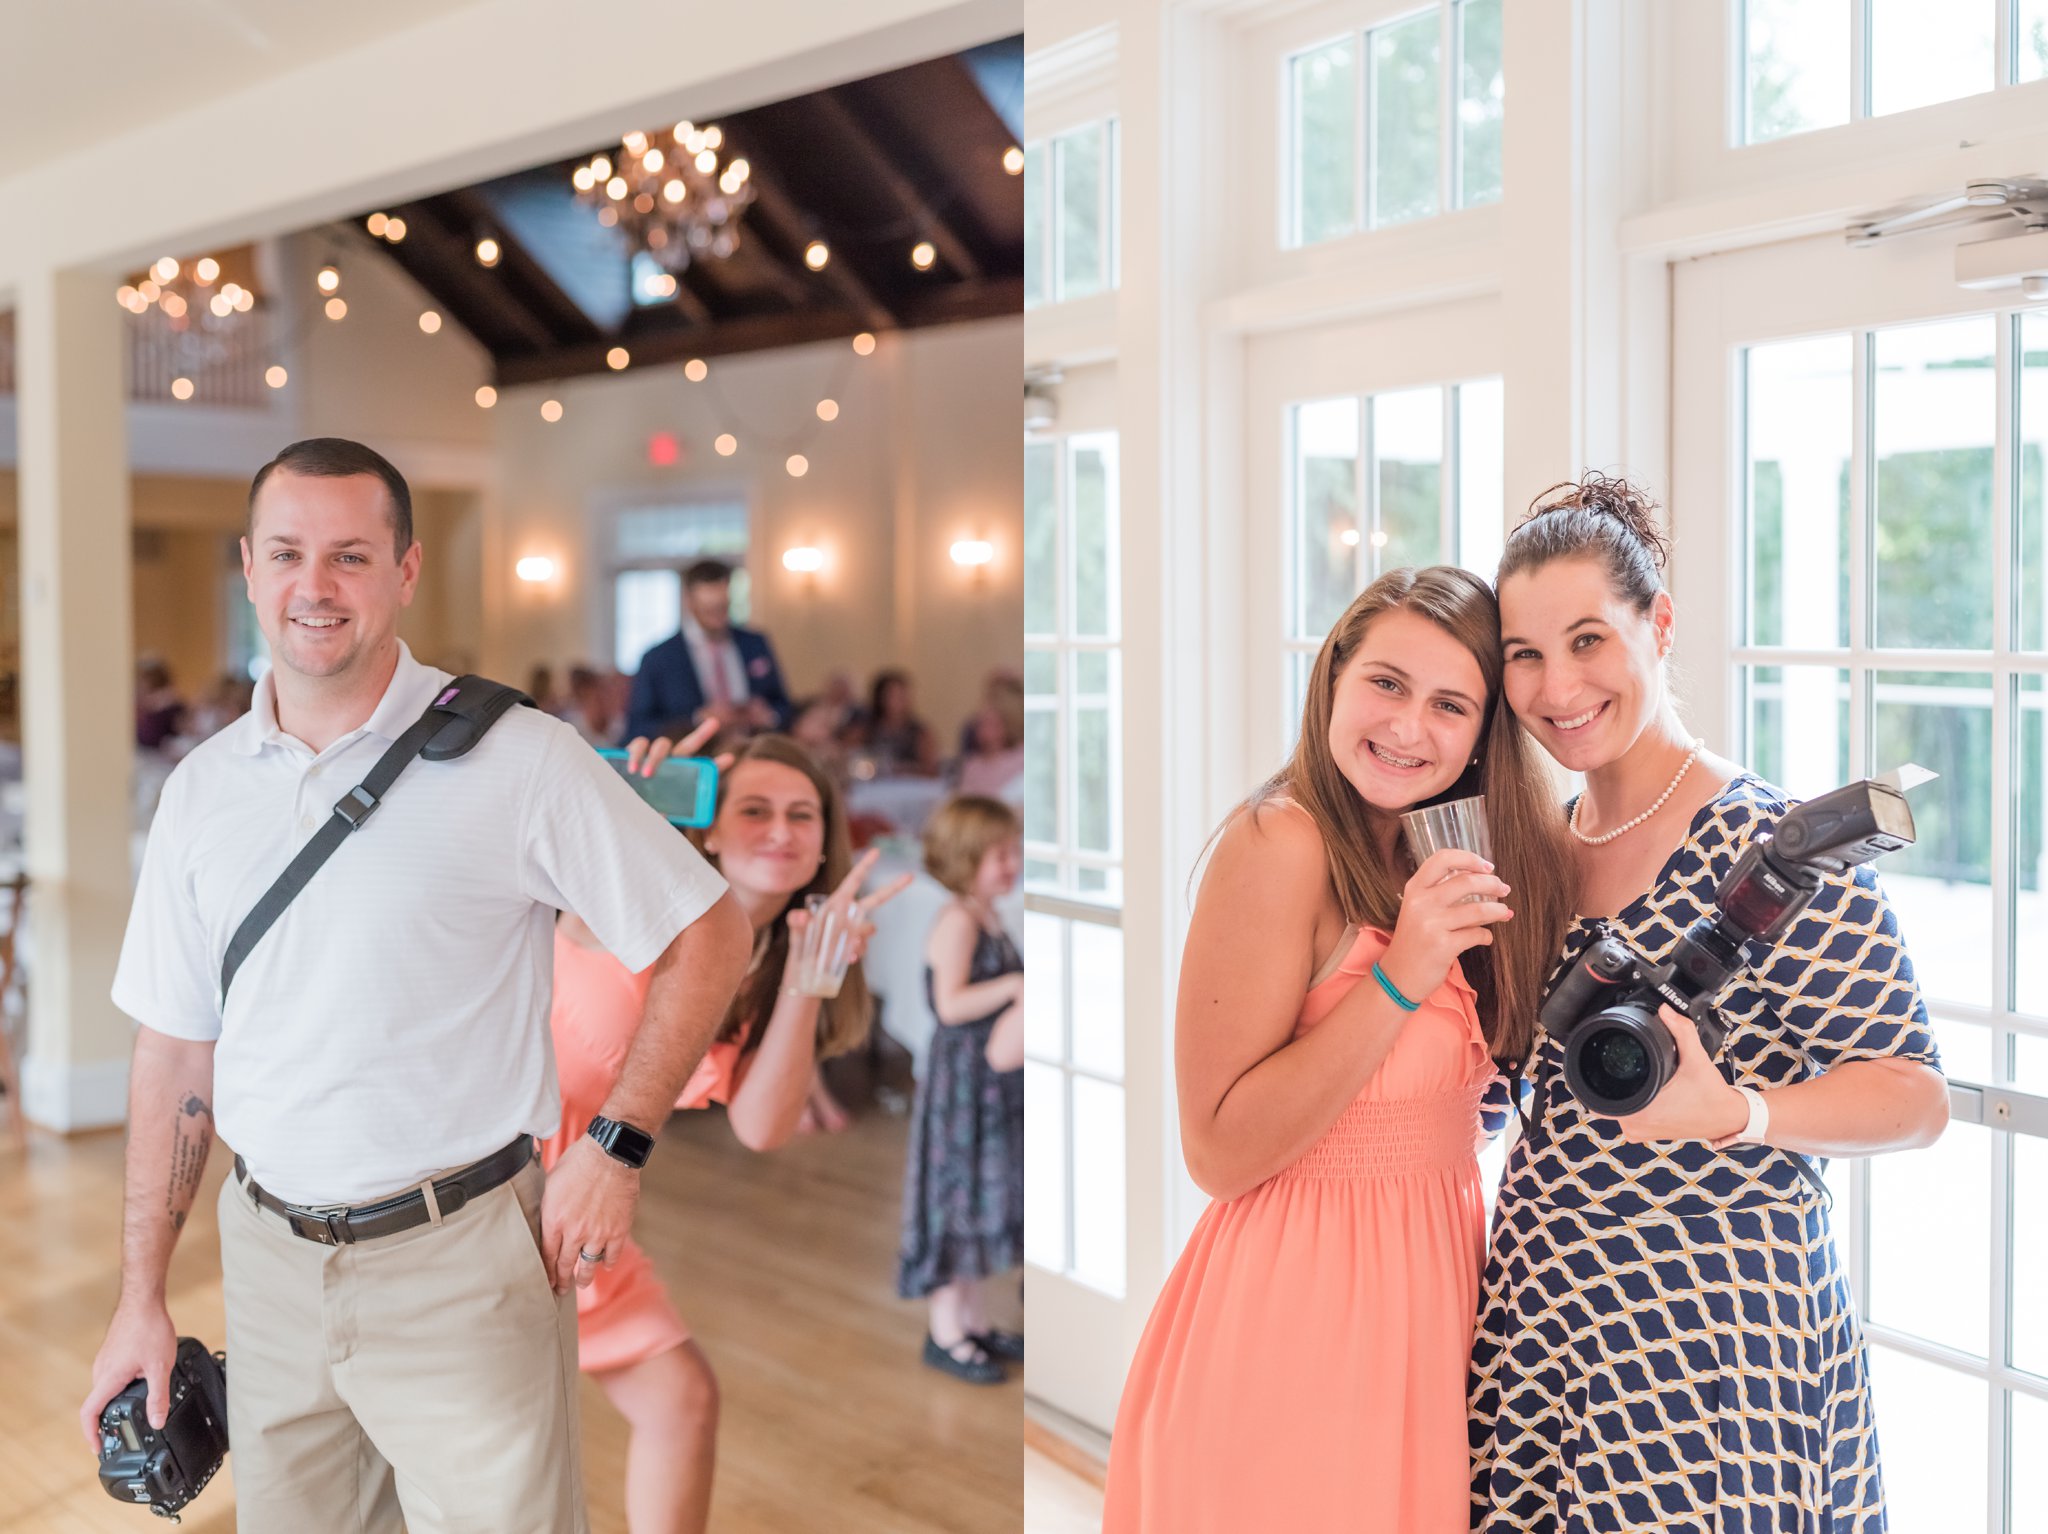  Sydney helped assist at several weddings with us, and we loved having her!&nbsp; 